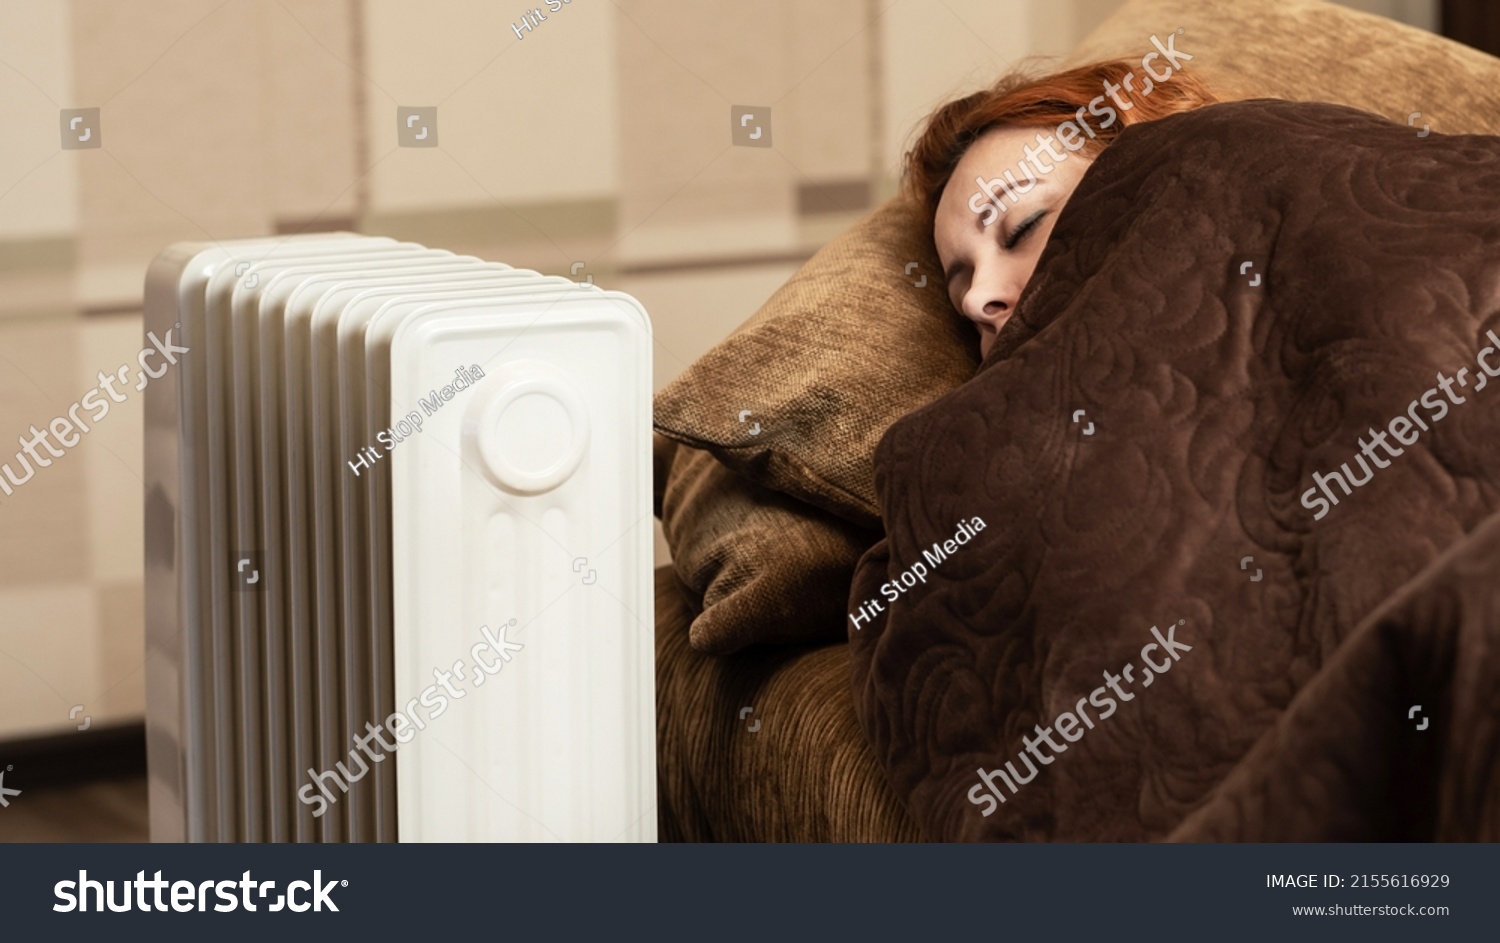 A young girl sleeps wrapped in a blanket near the heating radiator at home. Heating season. #2155616929